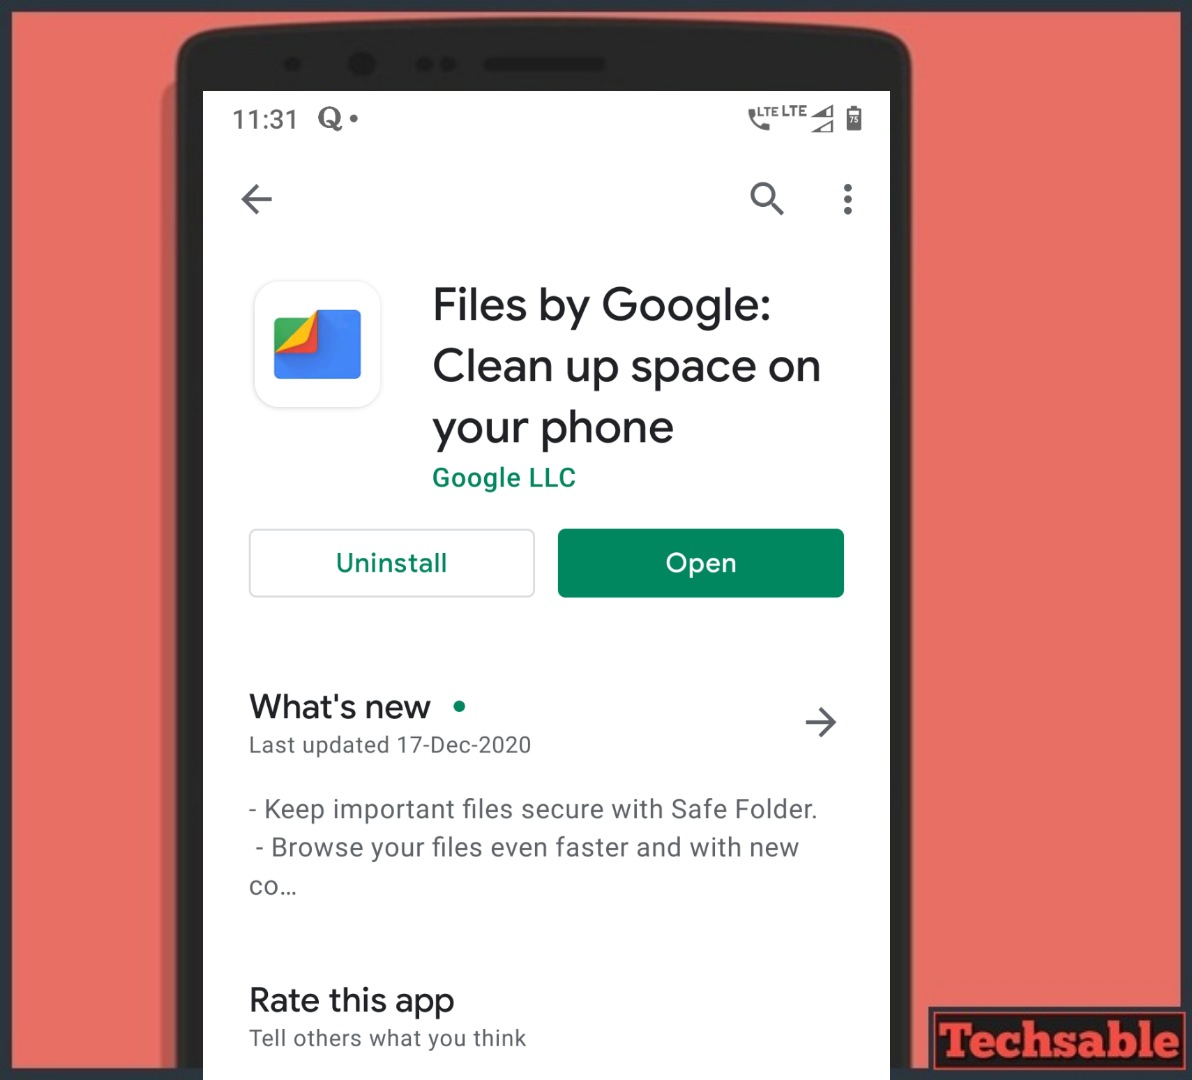 Files by Google Files Sharing Apps for Android